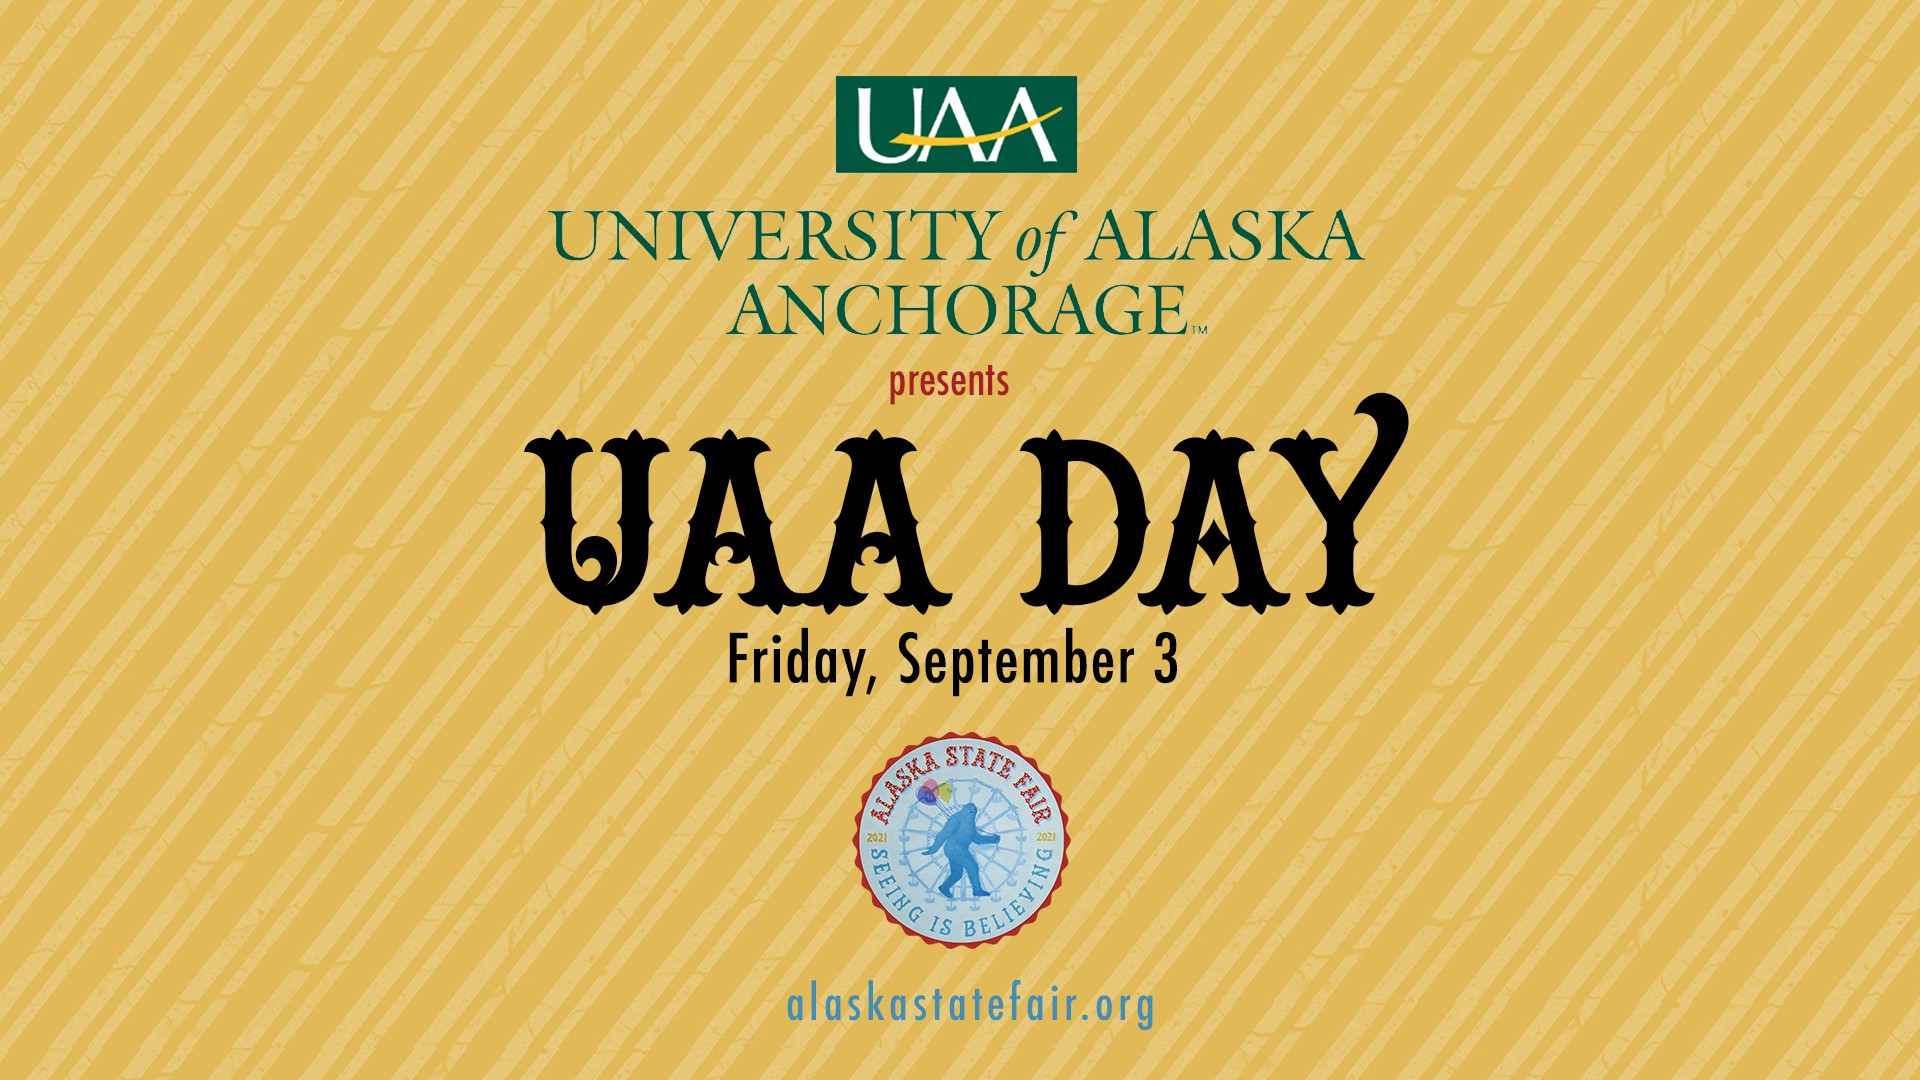 UAA Day at the Alaska State Fair is Sept. 3, 2021!